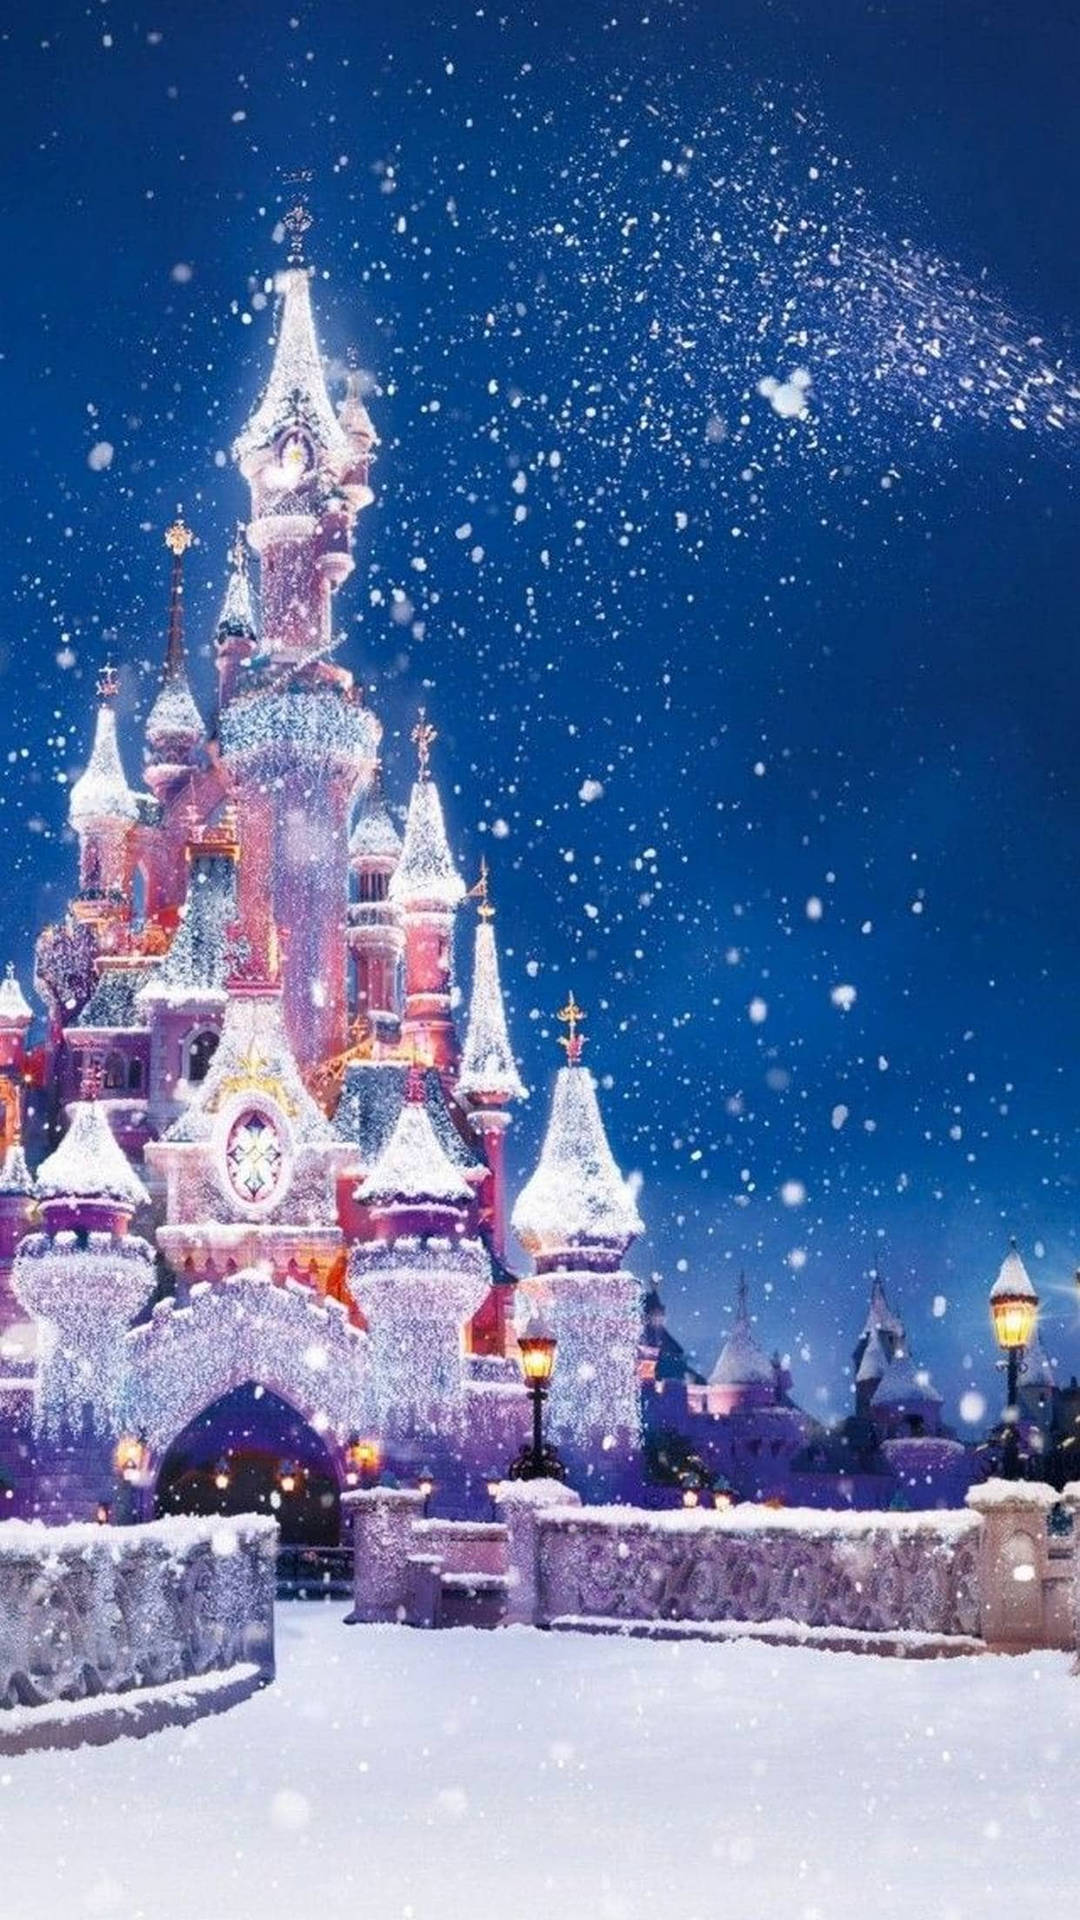 Snow Castle Christmas Iphone Background